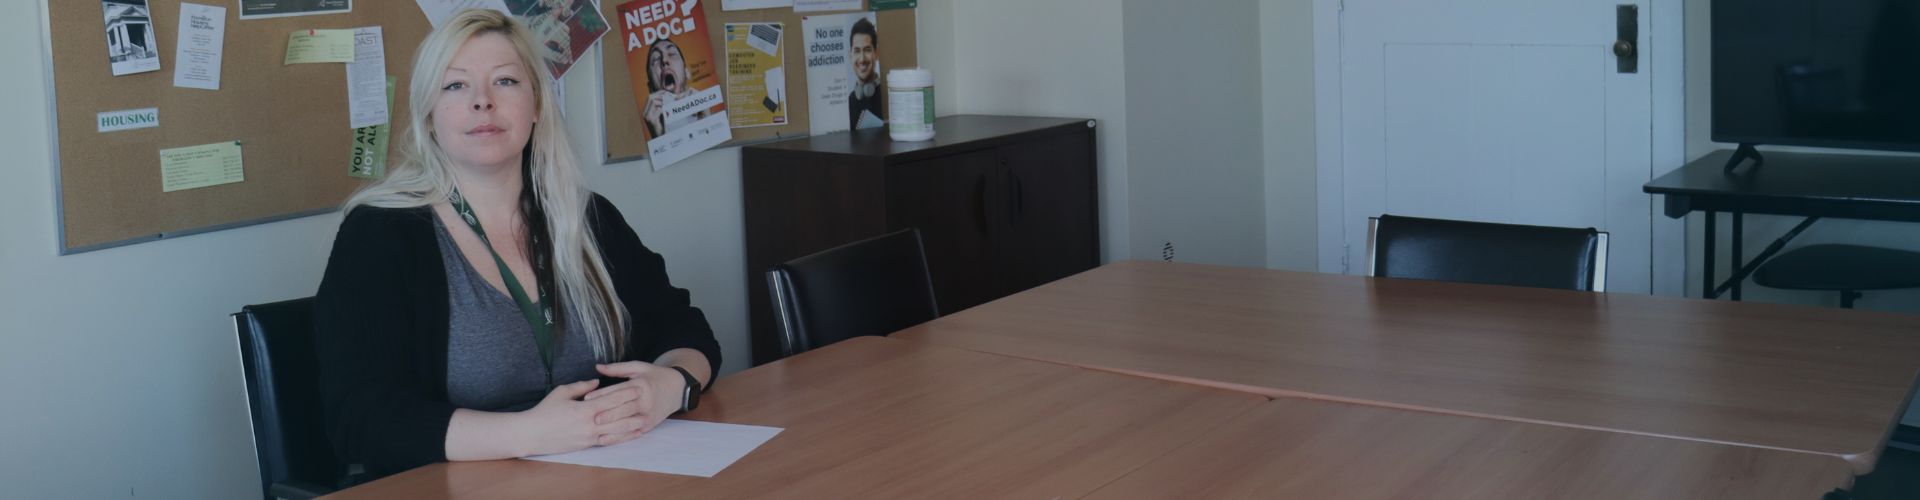 A woman sitting at a table ready for a meeting